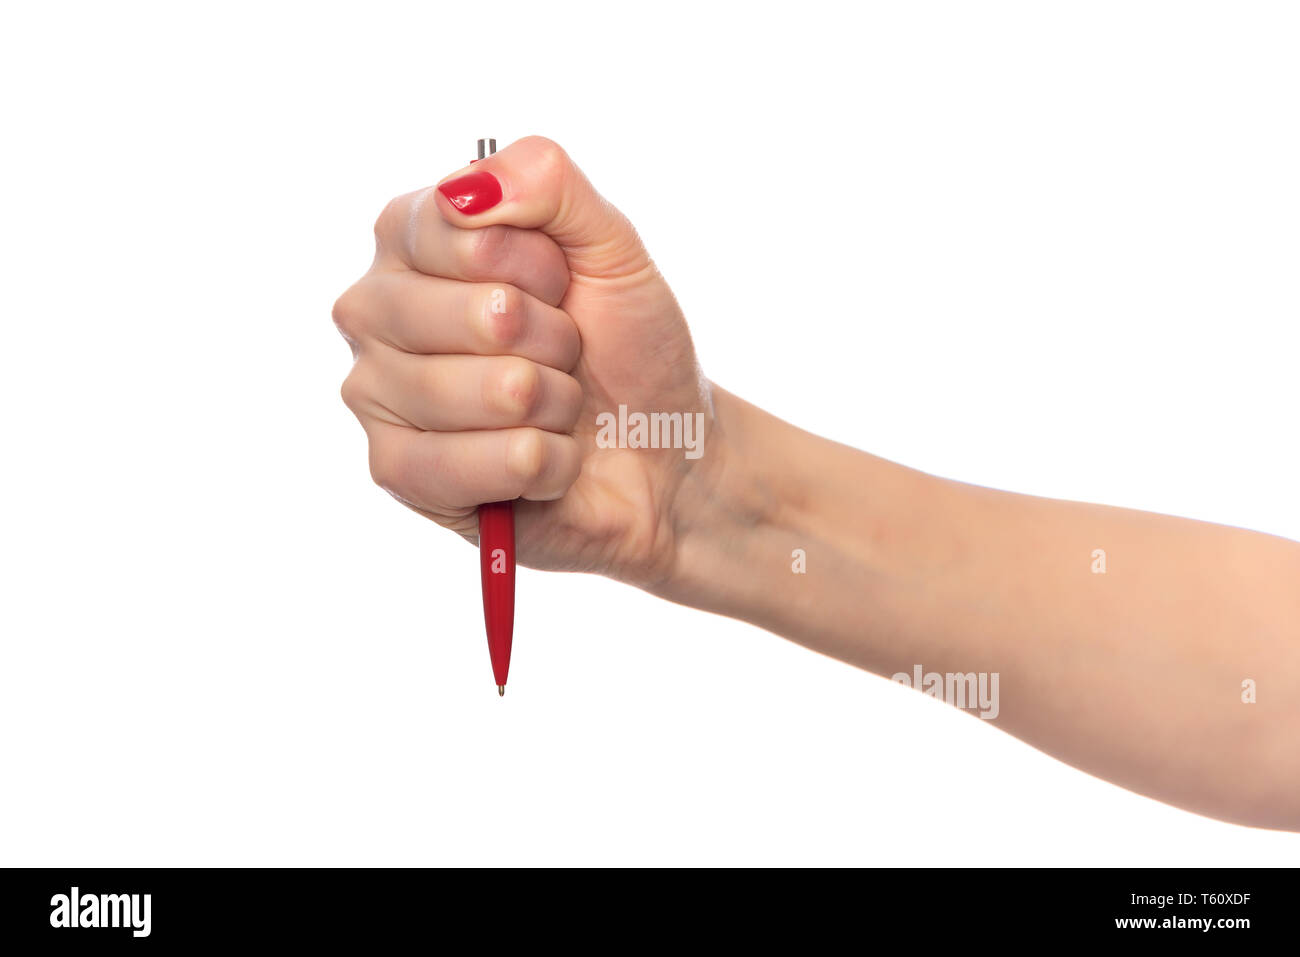 Female hand holding a pen on white background. Stock Photo